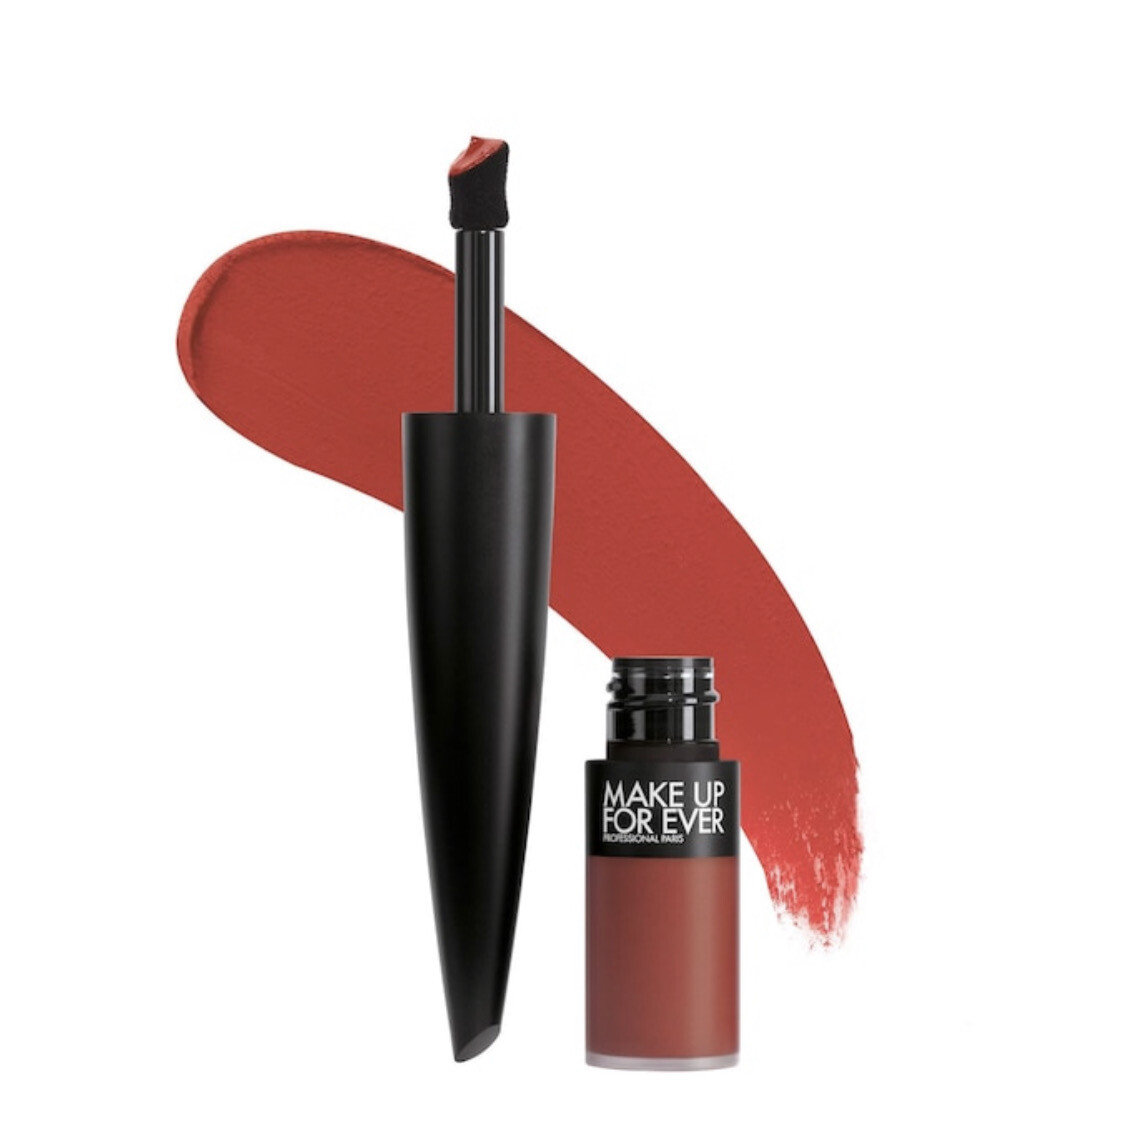 Make Up For Ever - Rouge Artist For Ever Matte 24HR Longwear Liquid Lipstick | 320 Goji All The Time - warm rosy nude